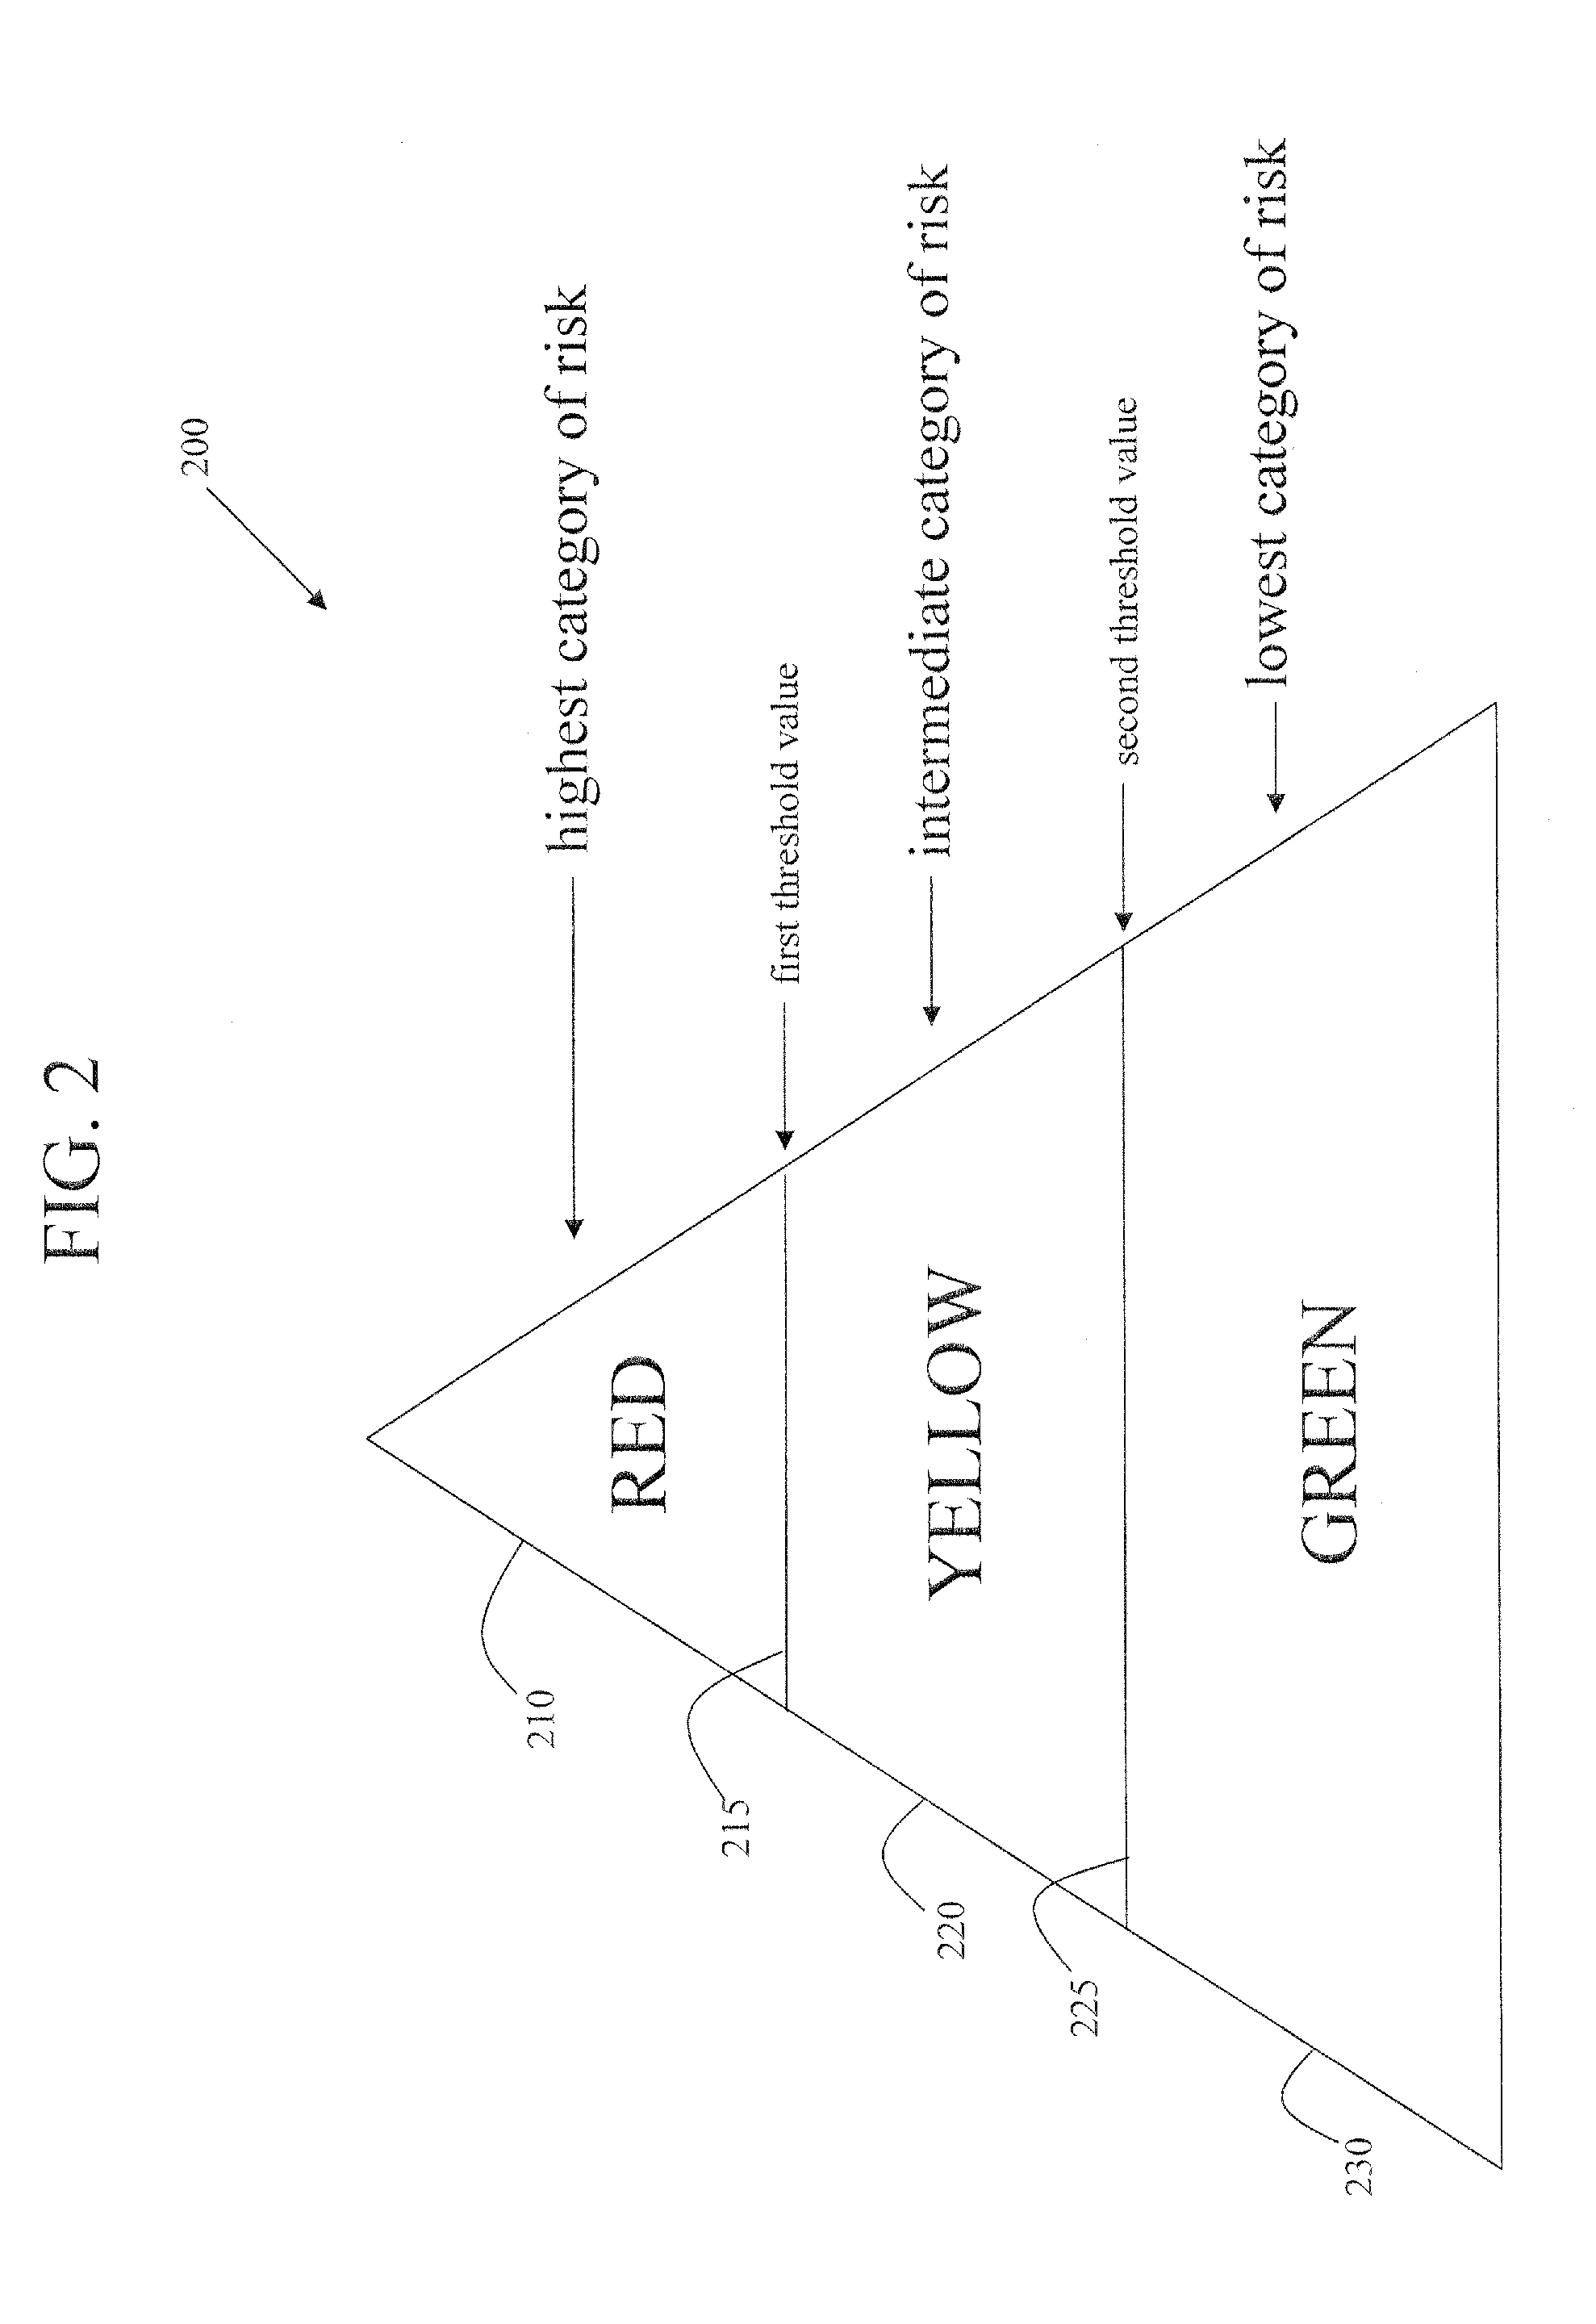 Methods of assessing fraud risk, and deterring, detecting, and mitigating fraud, within an organization